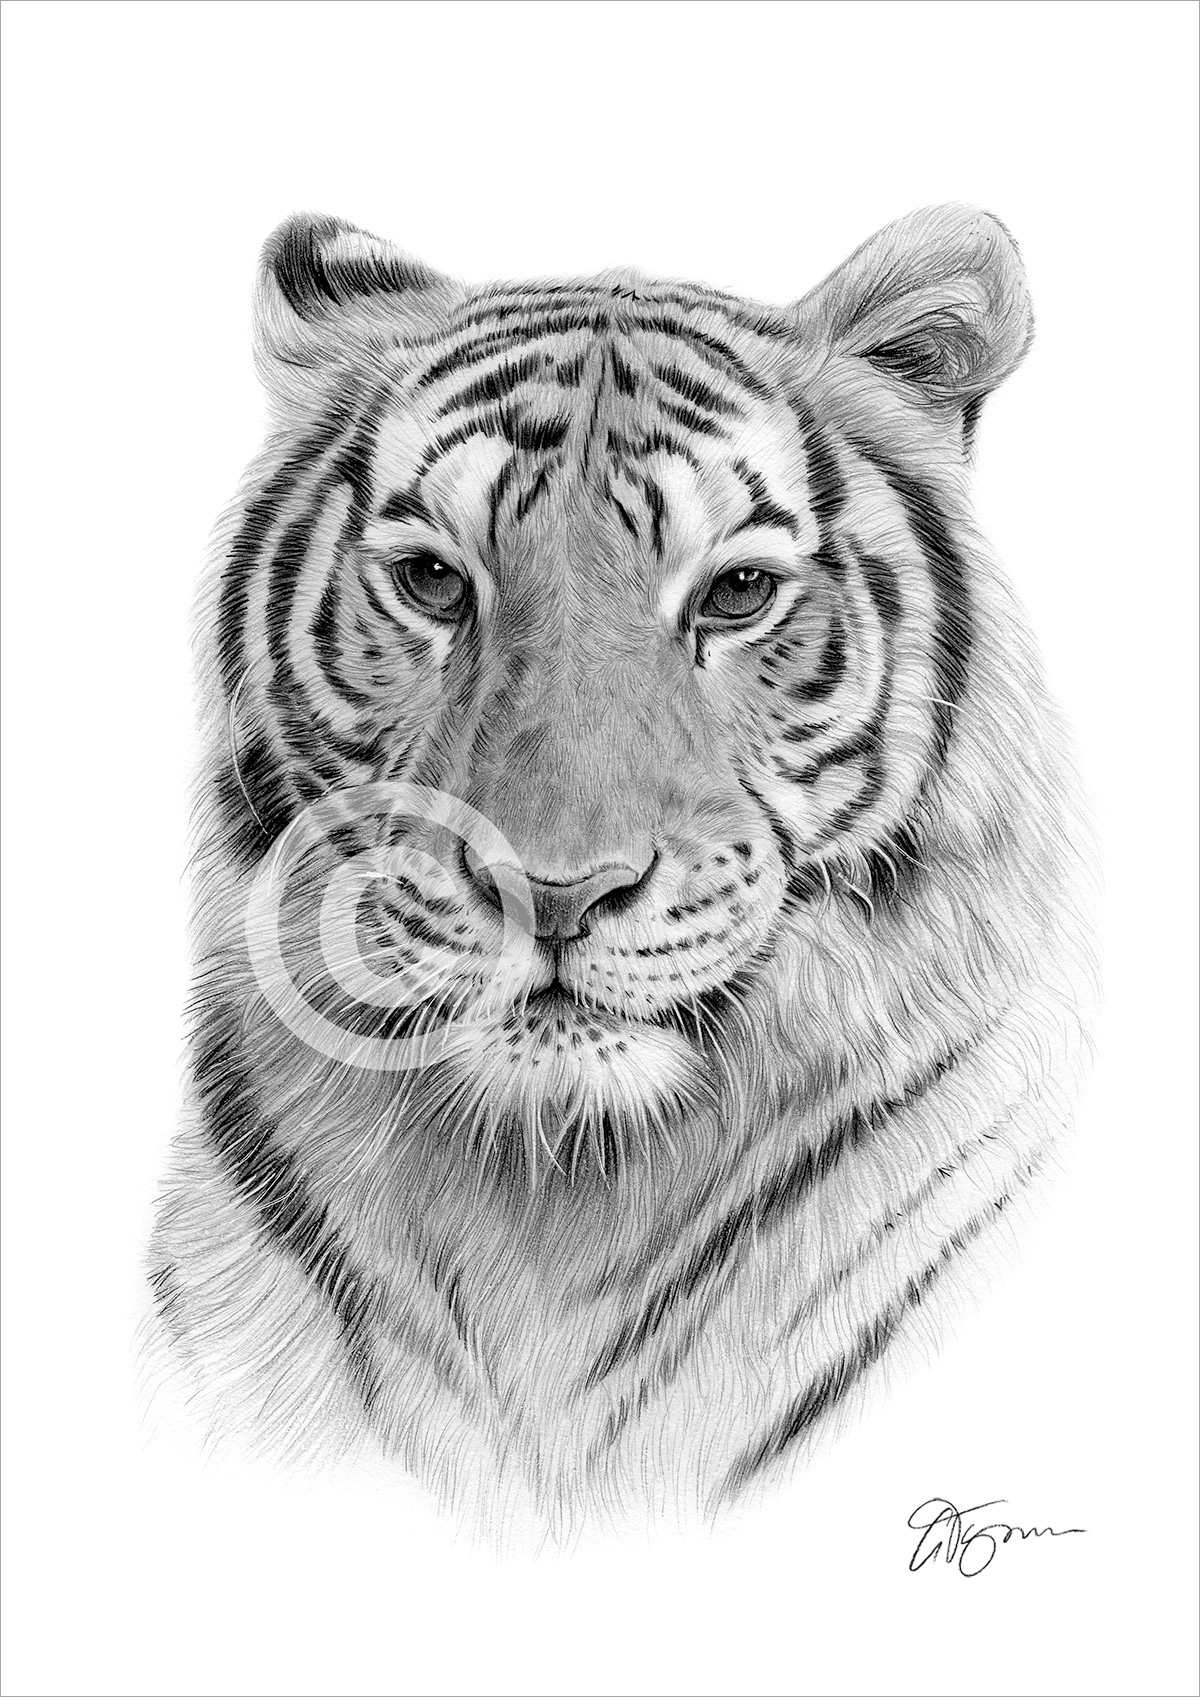 Pencil drawing of a Bengal tiger by UK artist Gary Tymon